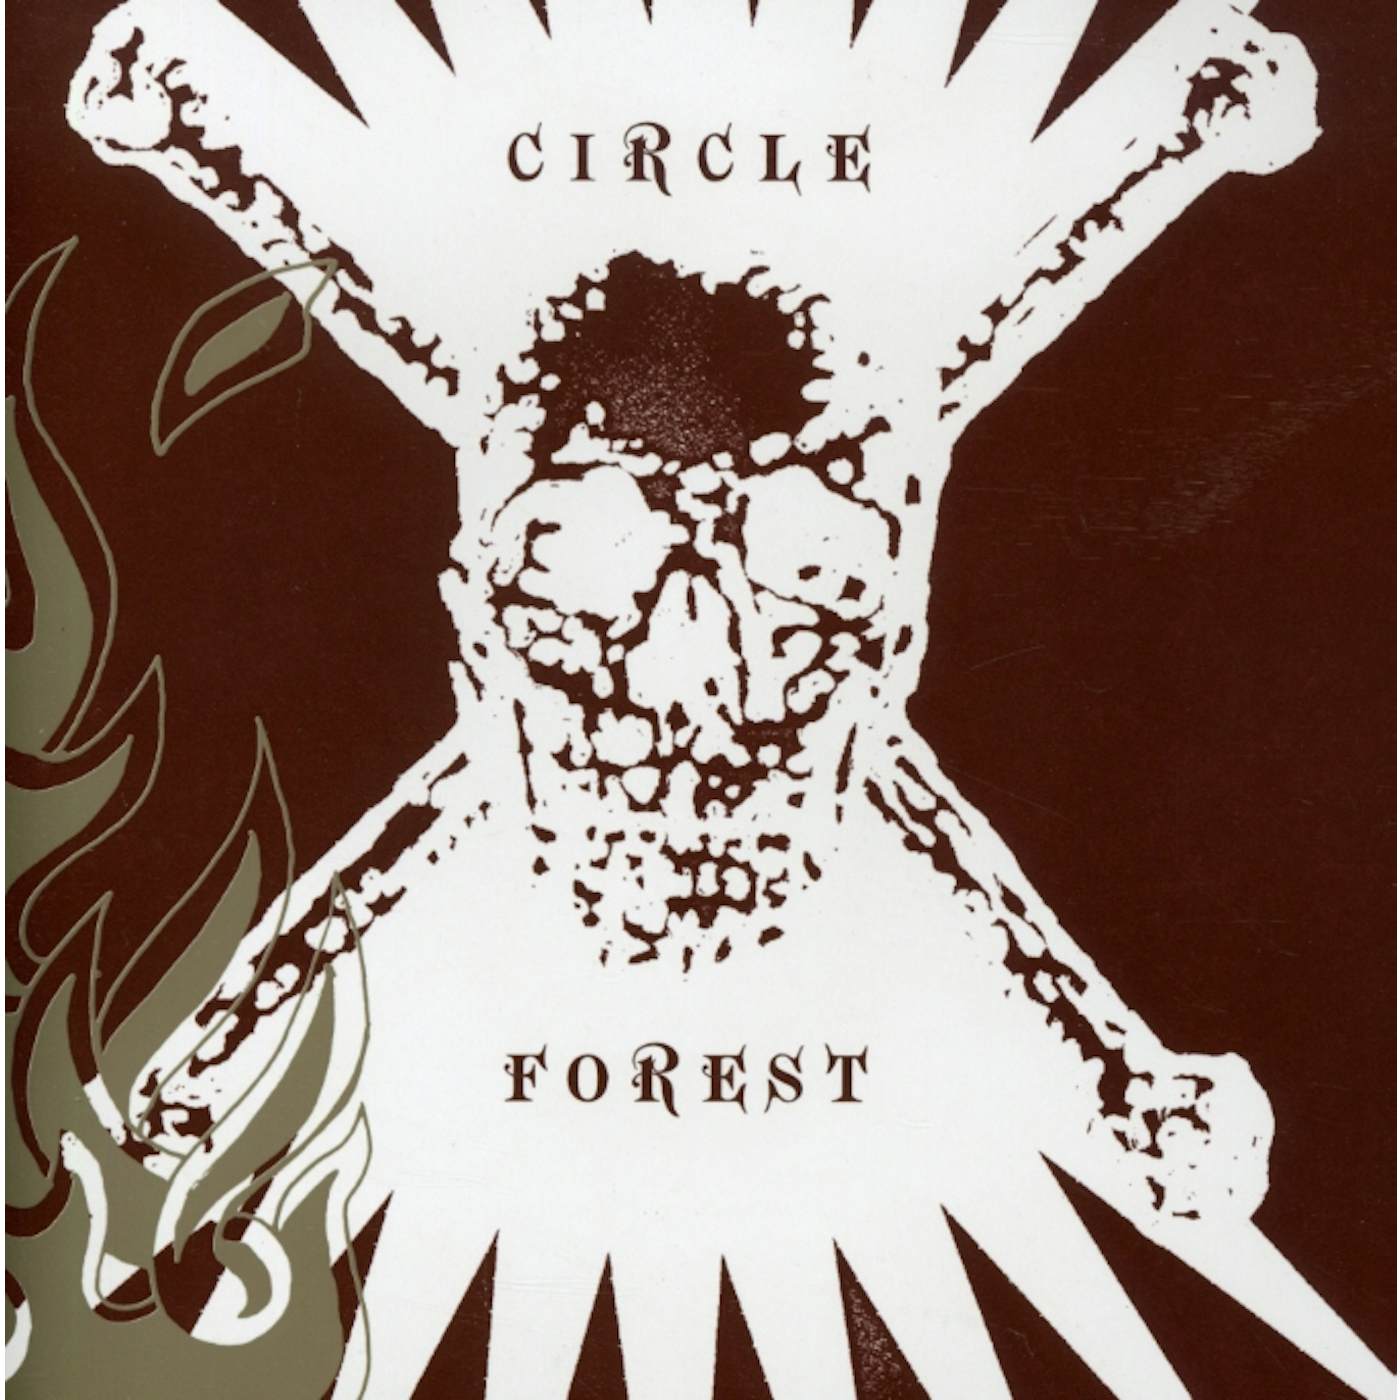 Circle FOREST CD